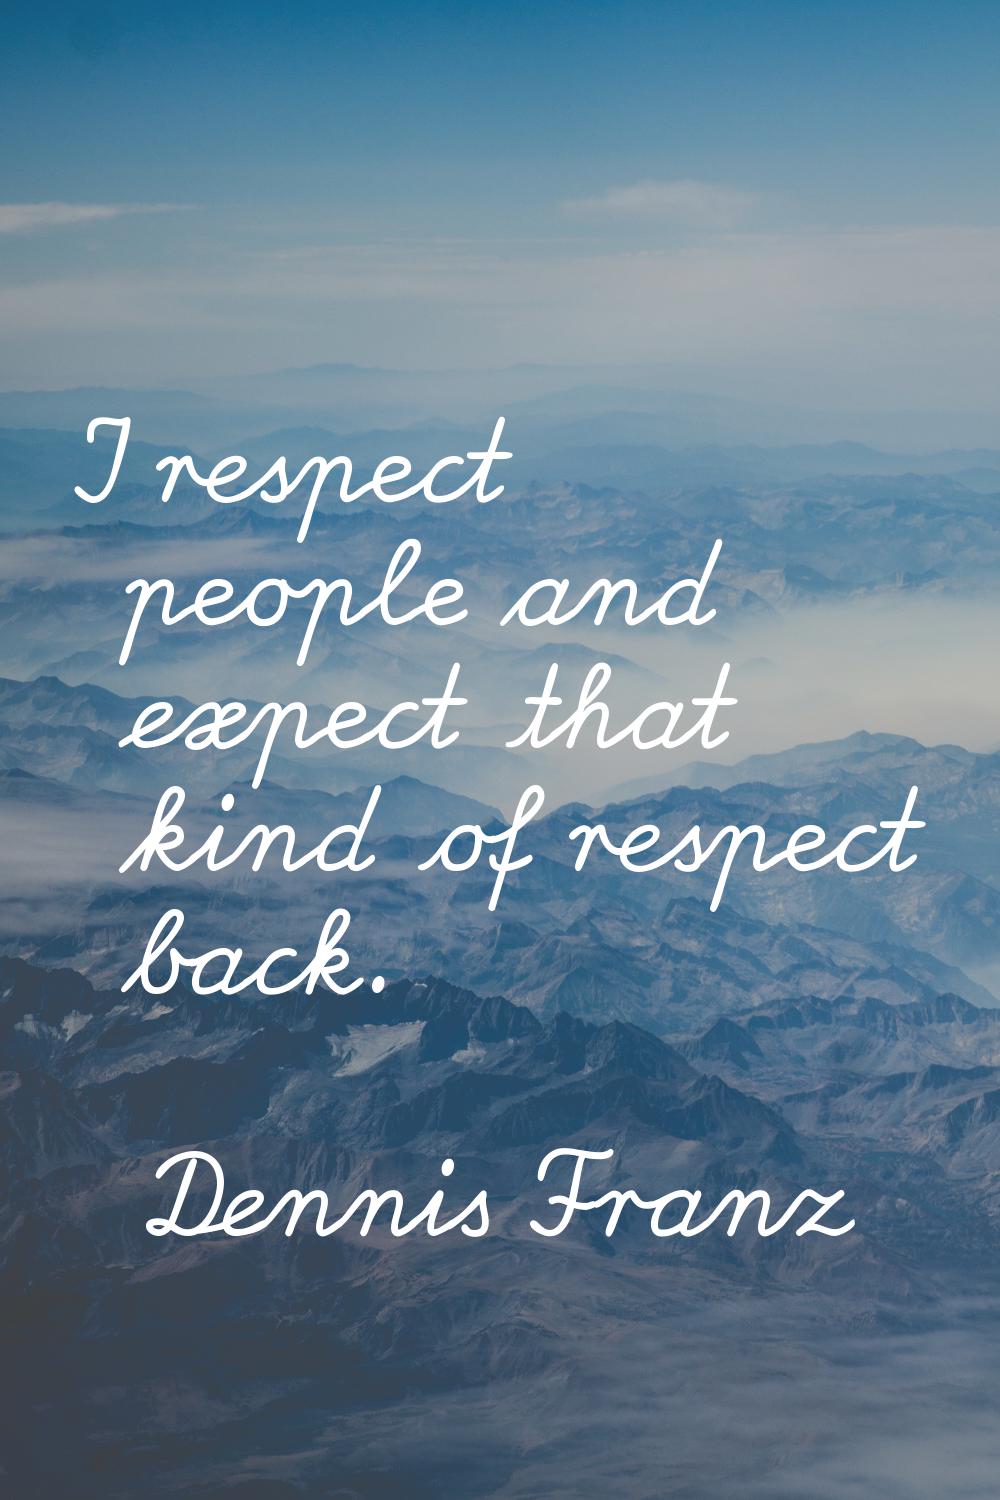 I respect people and expect that kind of respect back.